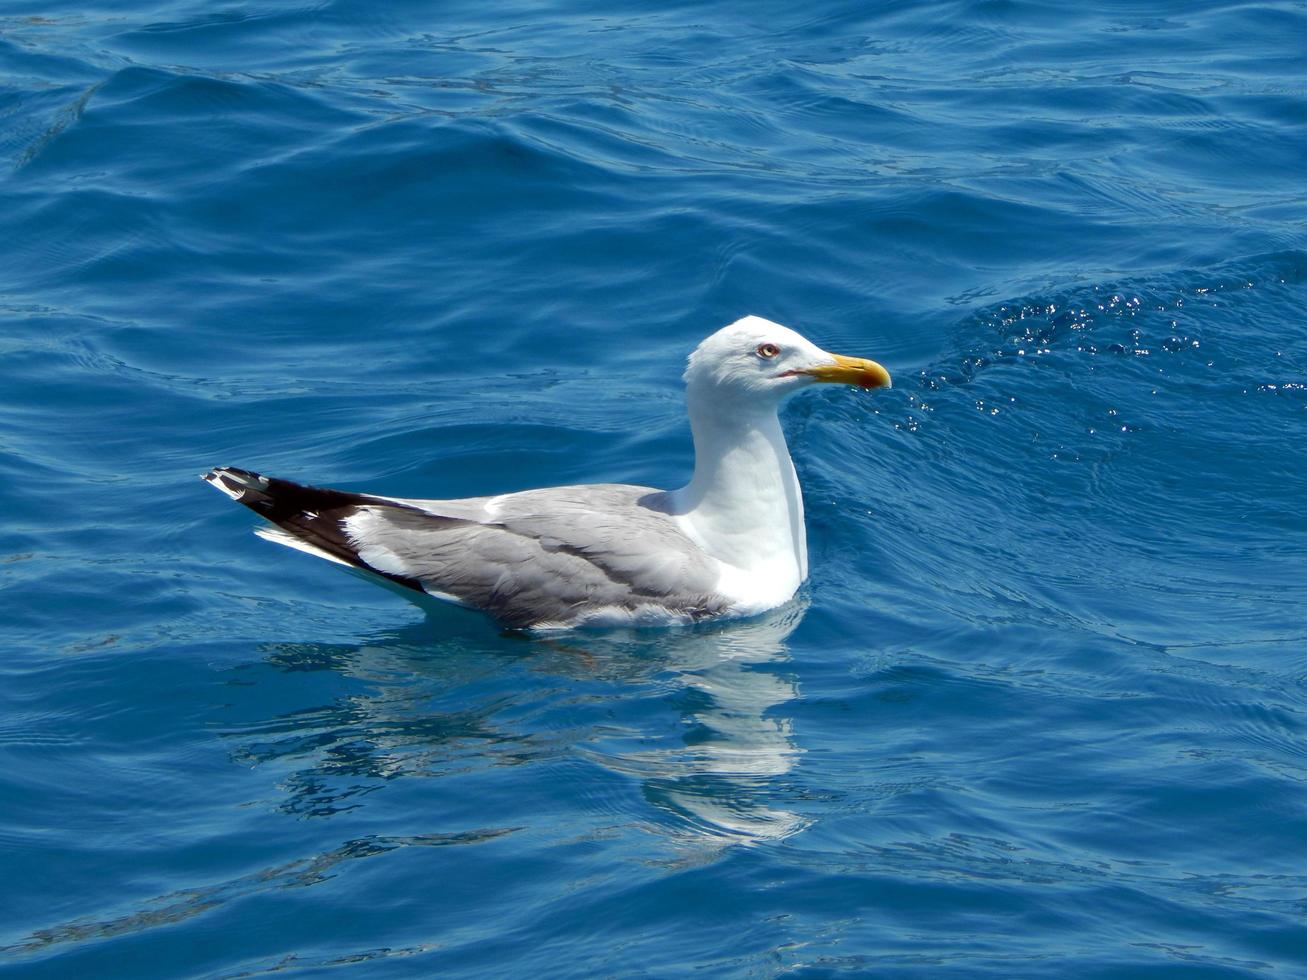 The seagull swims in the sea on the water photo